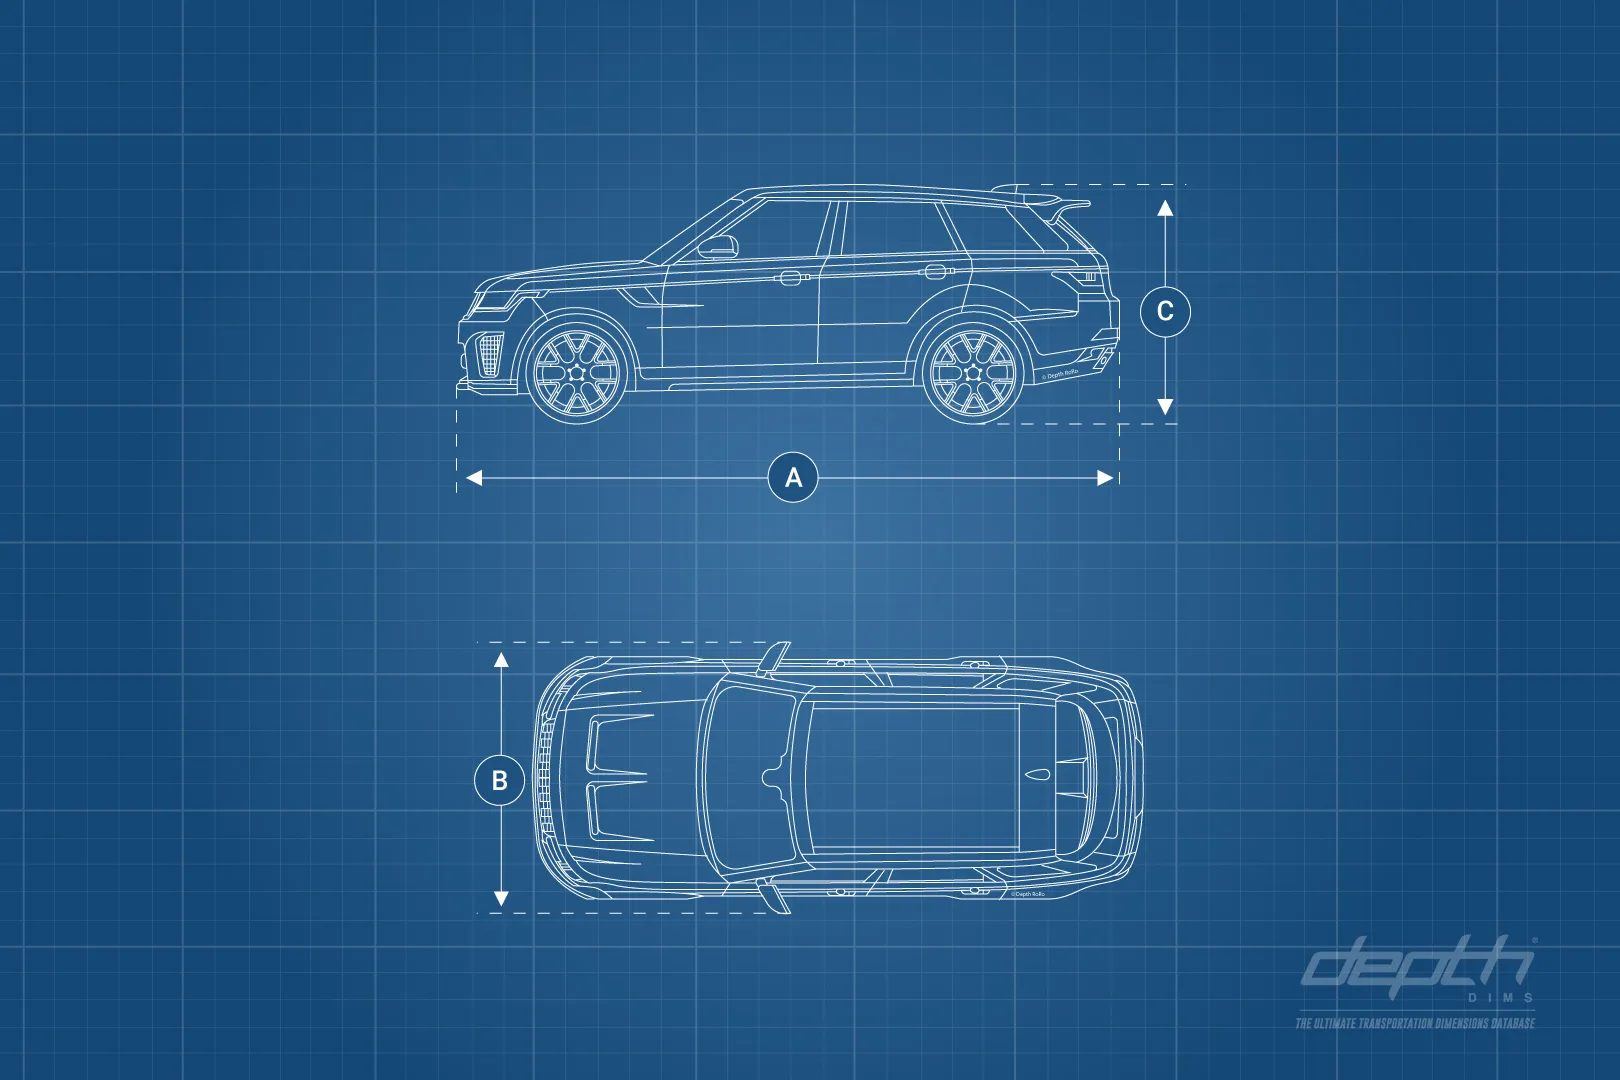 Seat Arona dimensions, boot space and similars